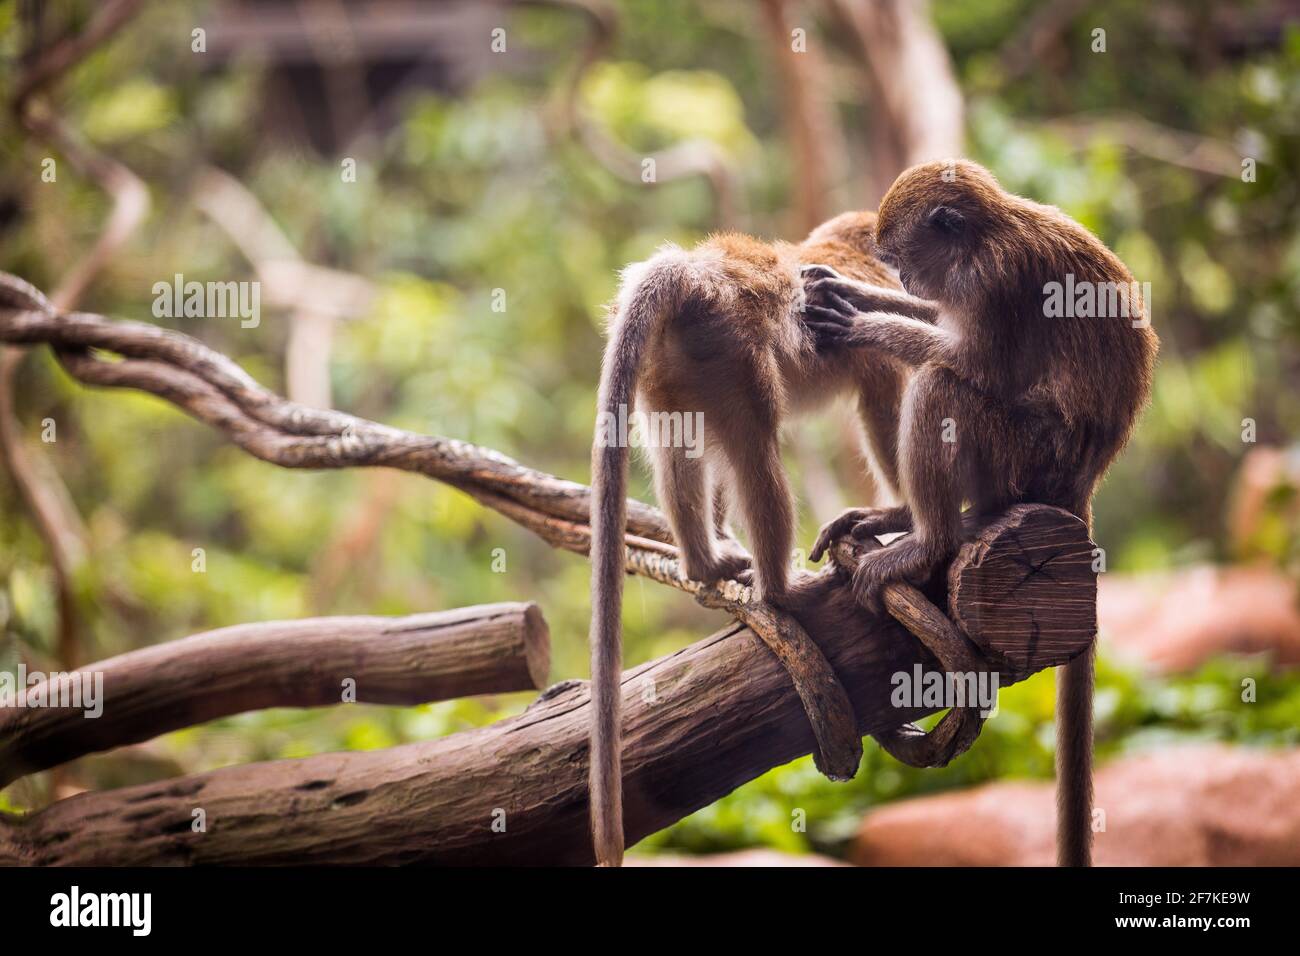 One monkey grooming and picking bugs on another monkey. Stock Photo